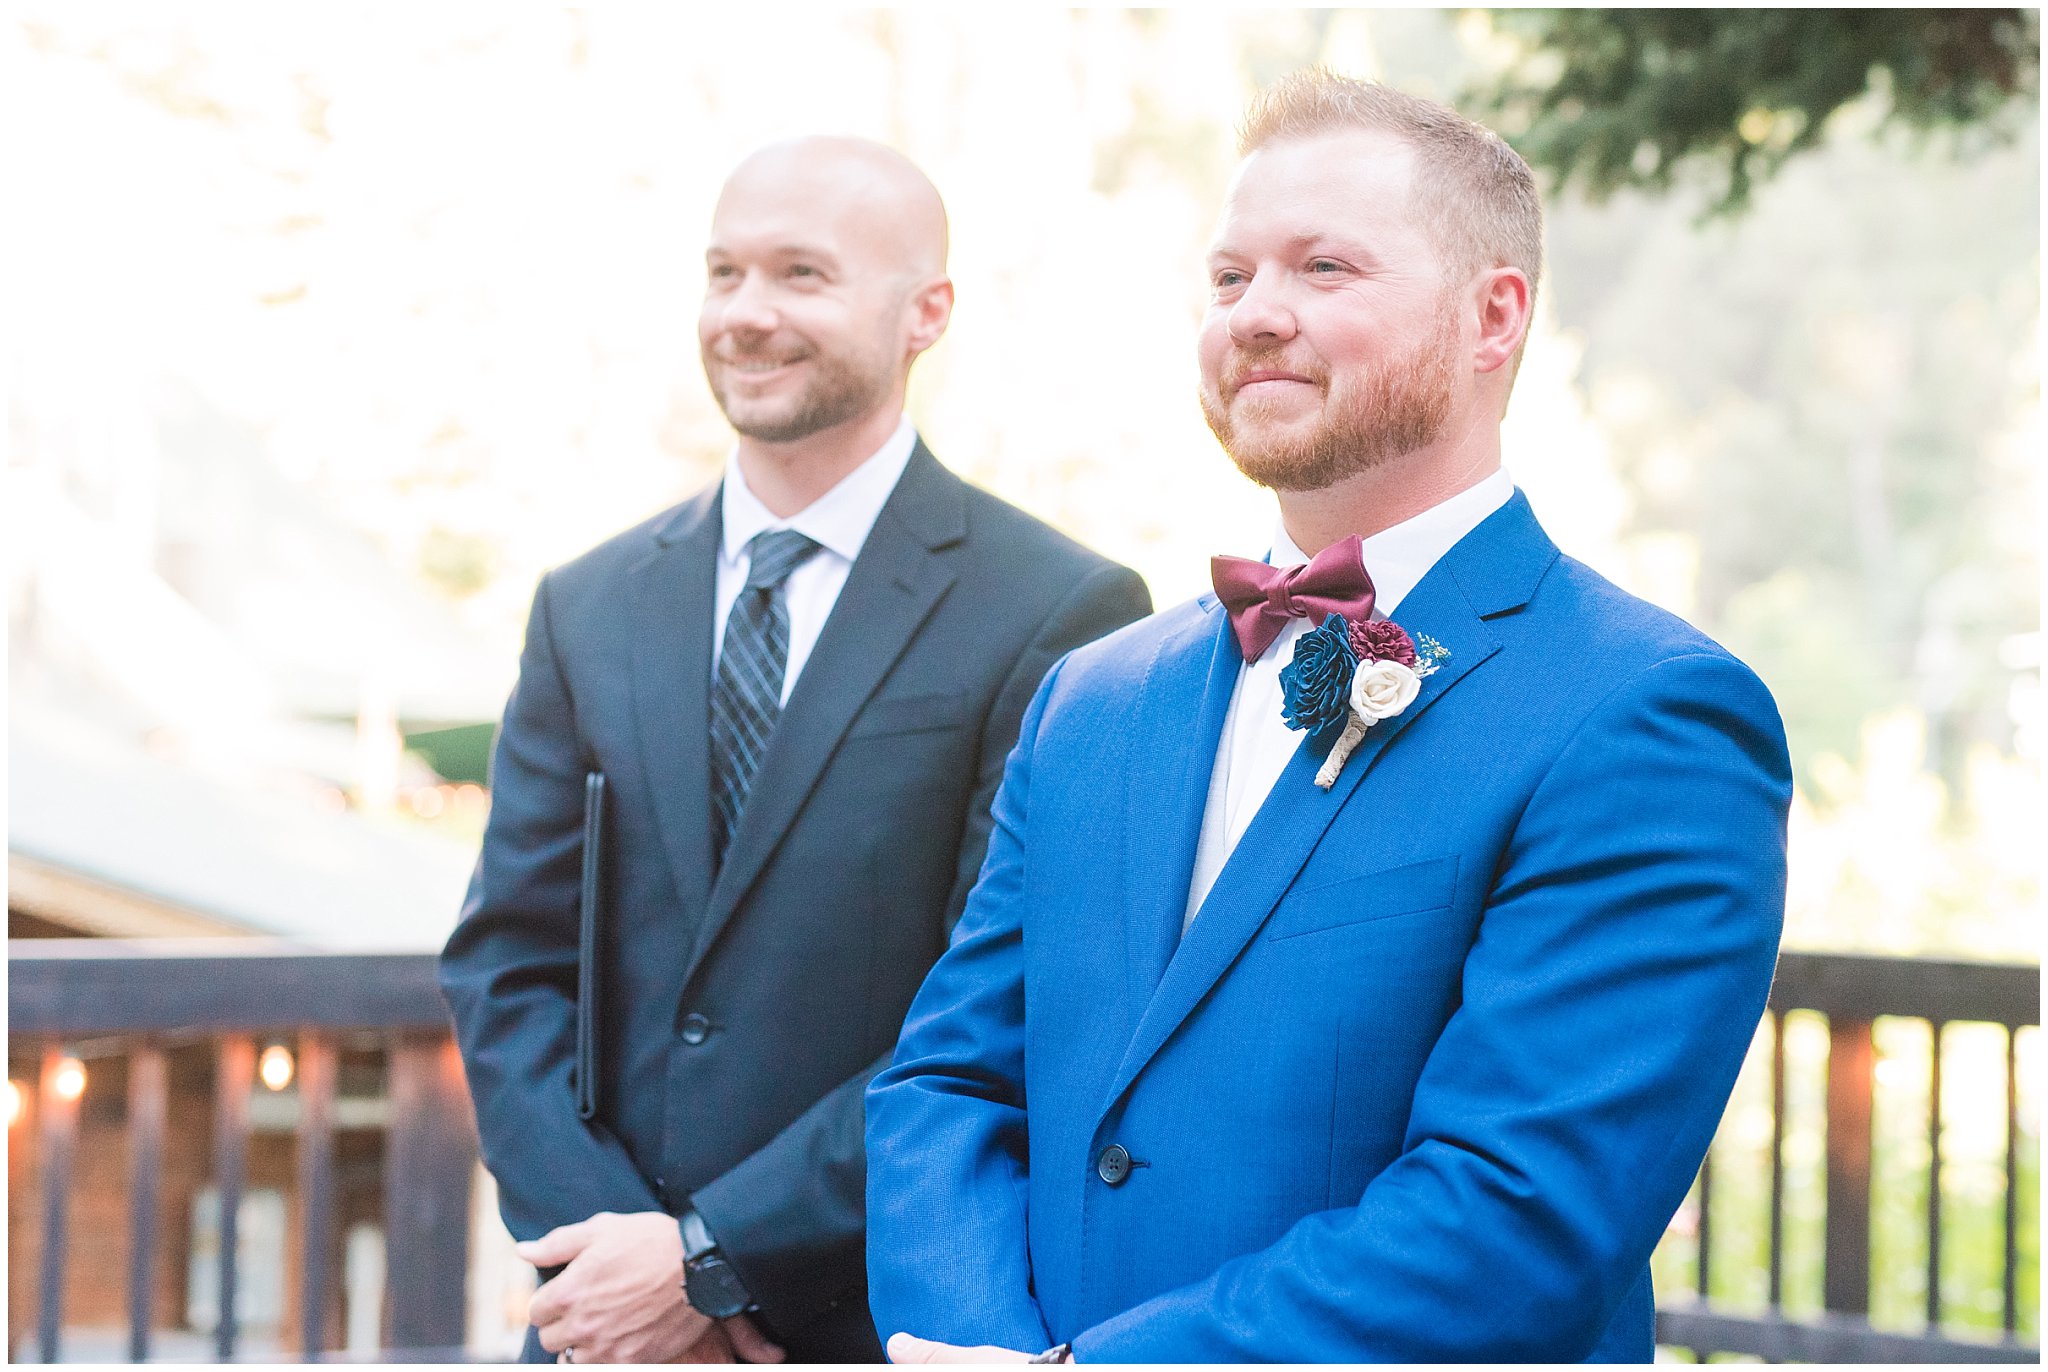 Groom seeing bride walk down the aisle | Log Haven Summer Mountain Wedding | Jessie and Dallin Photography